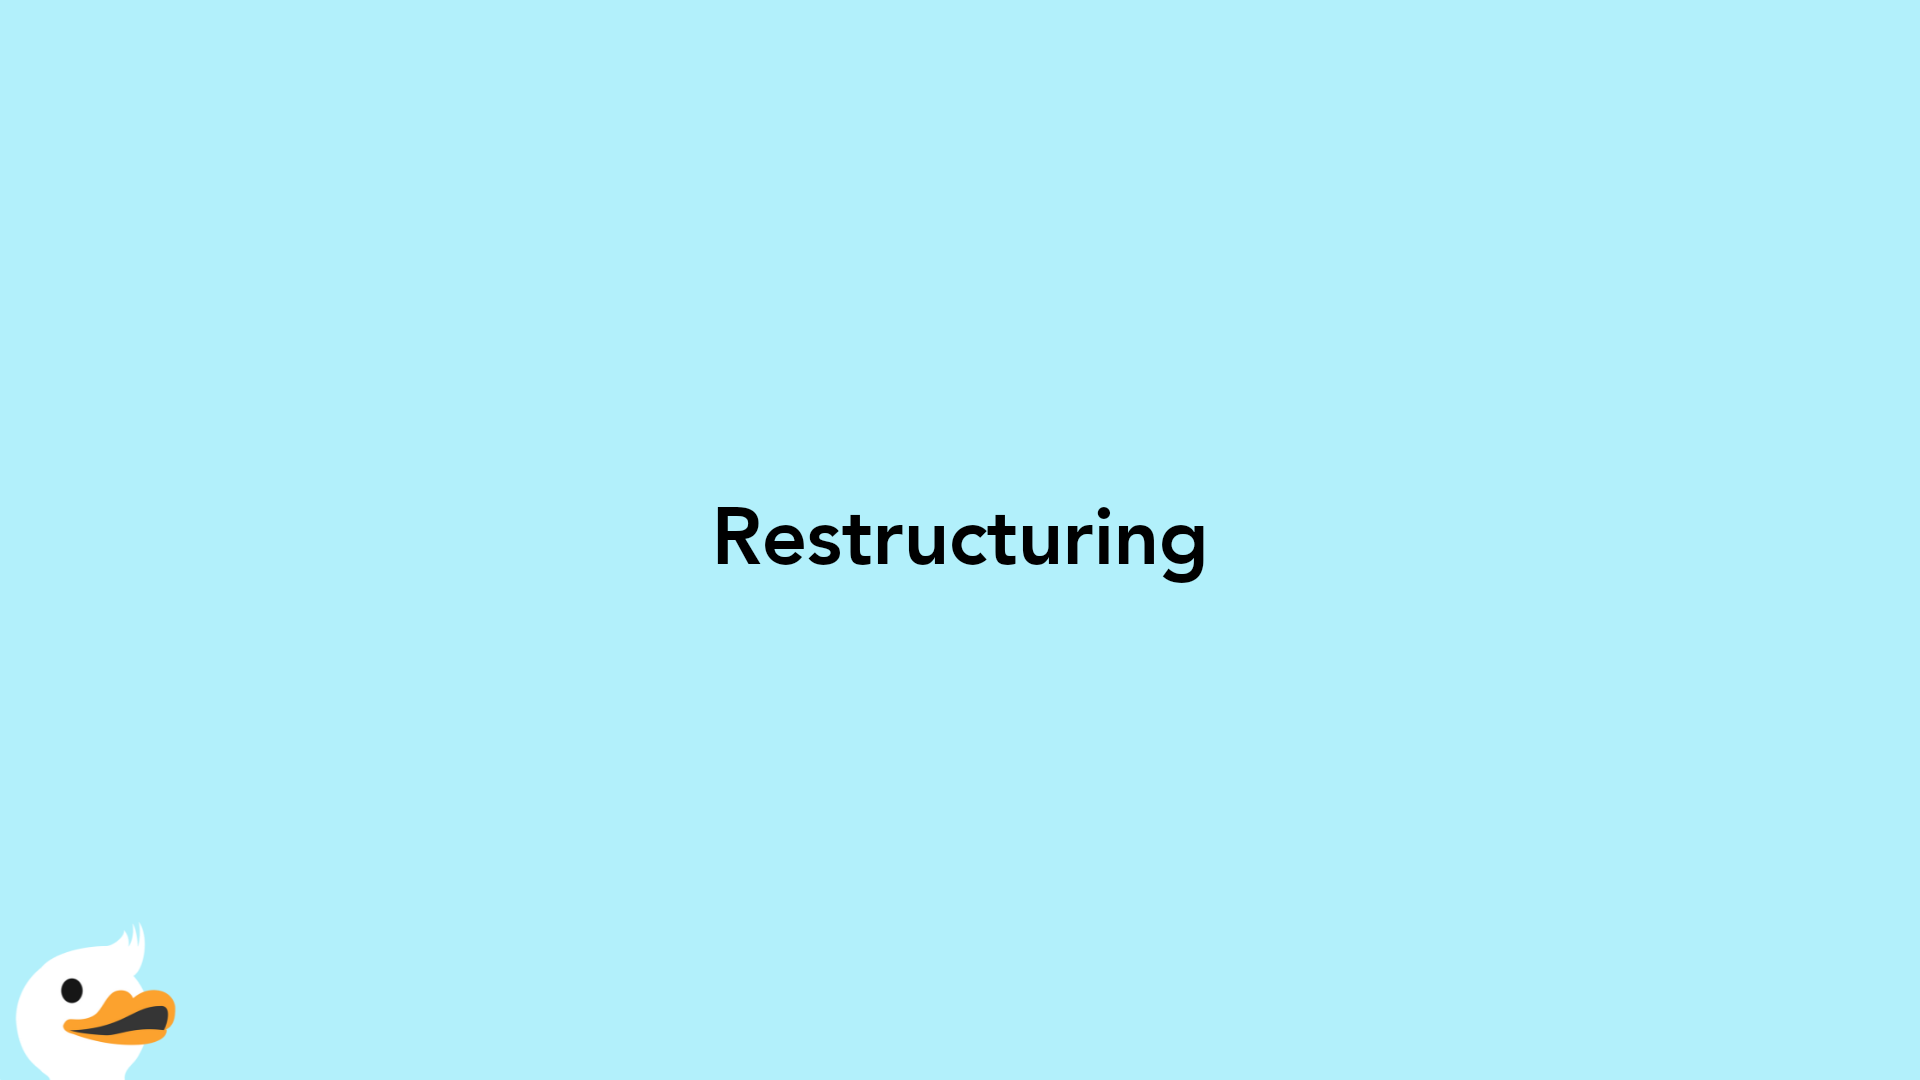 Restructuring